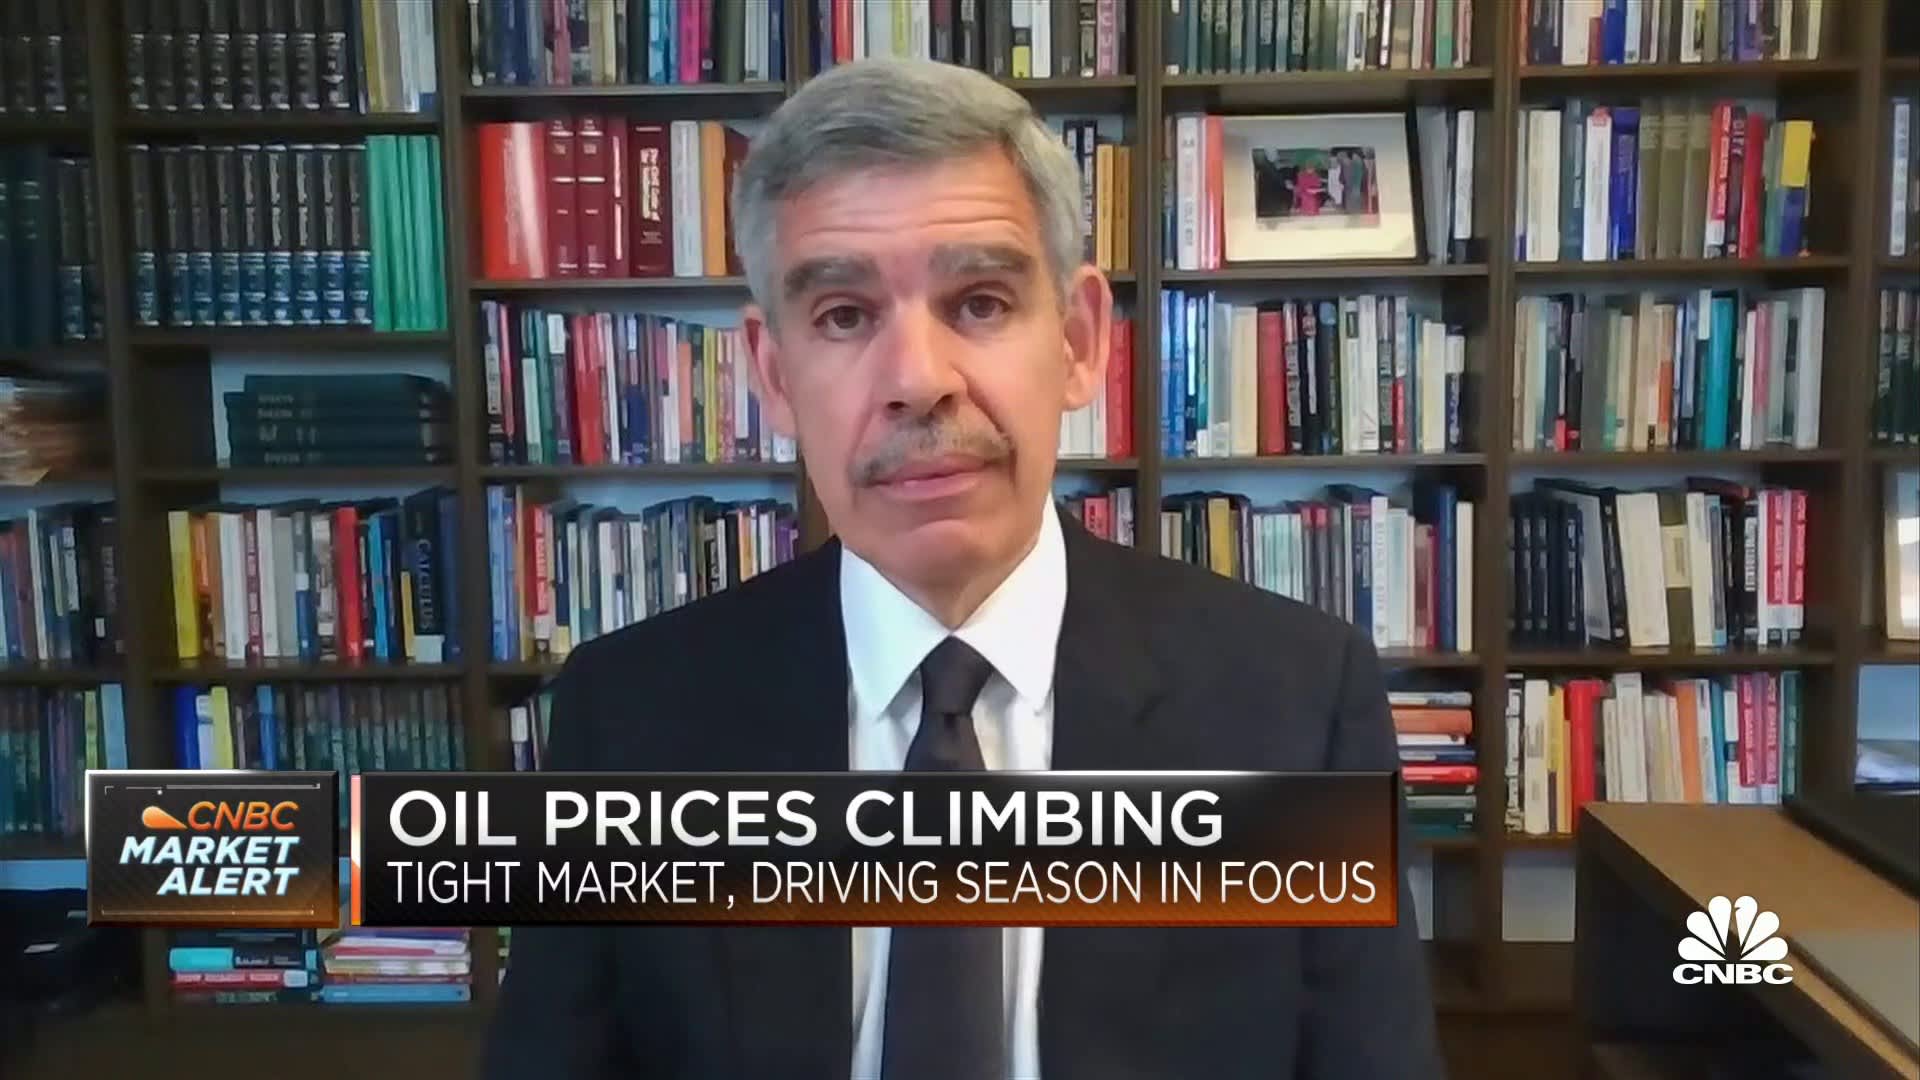 The market sell-off does not concern the Fed, says Mohamed El-Erian